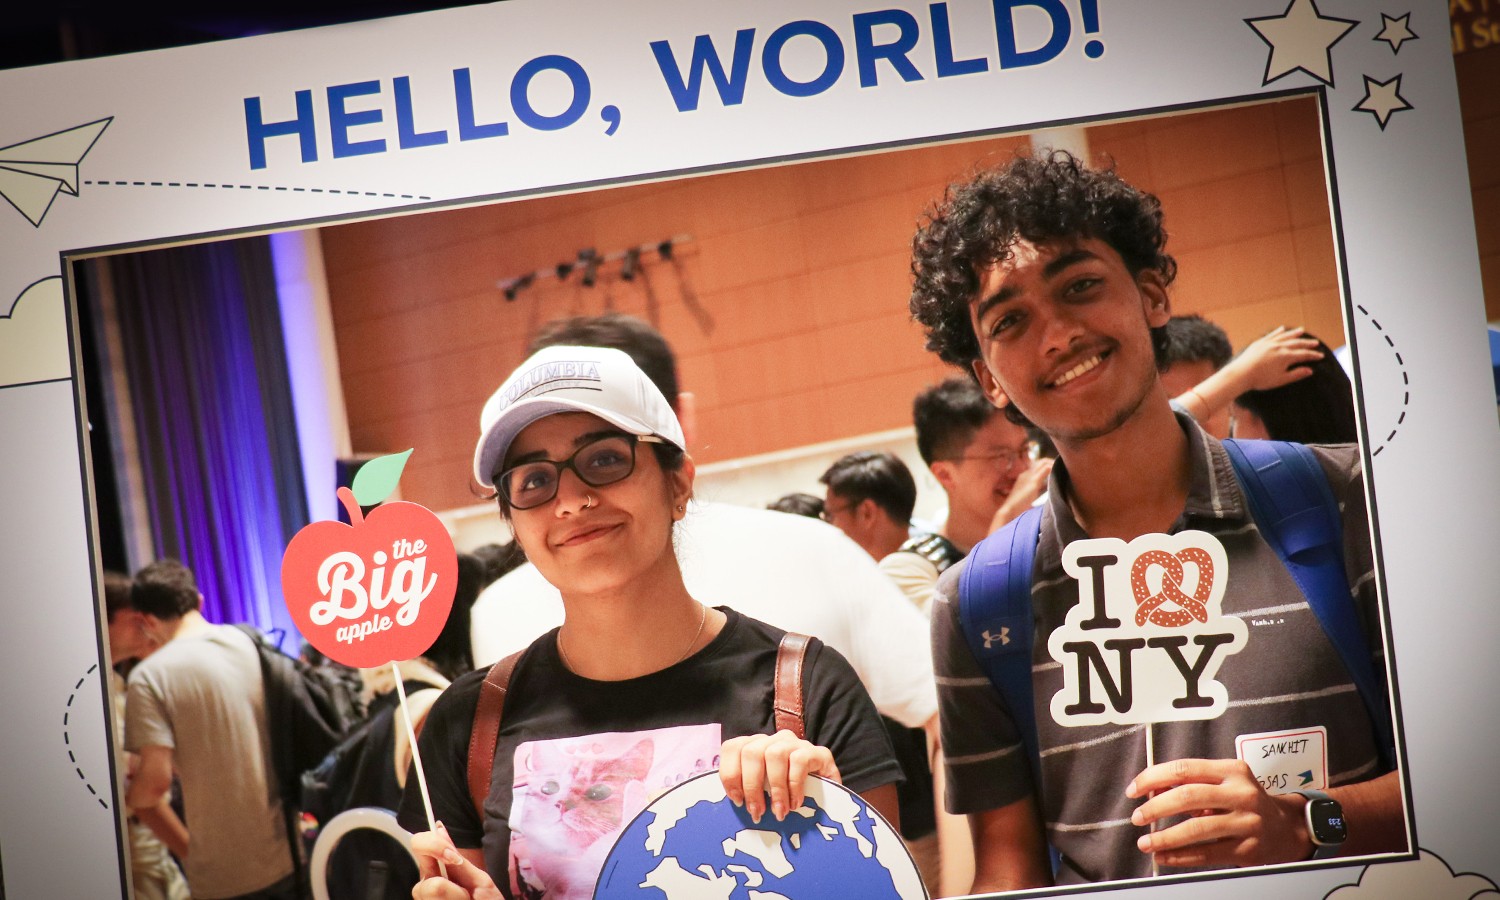 Images of Columbia students at an ISSO welcome event.